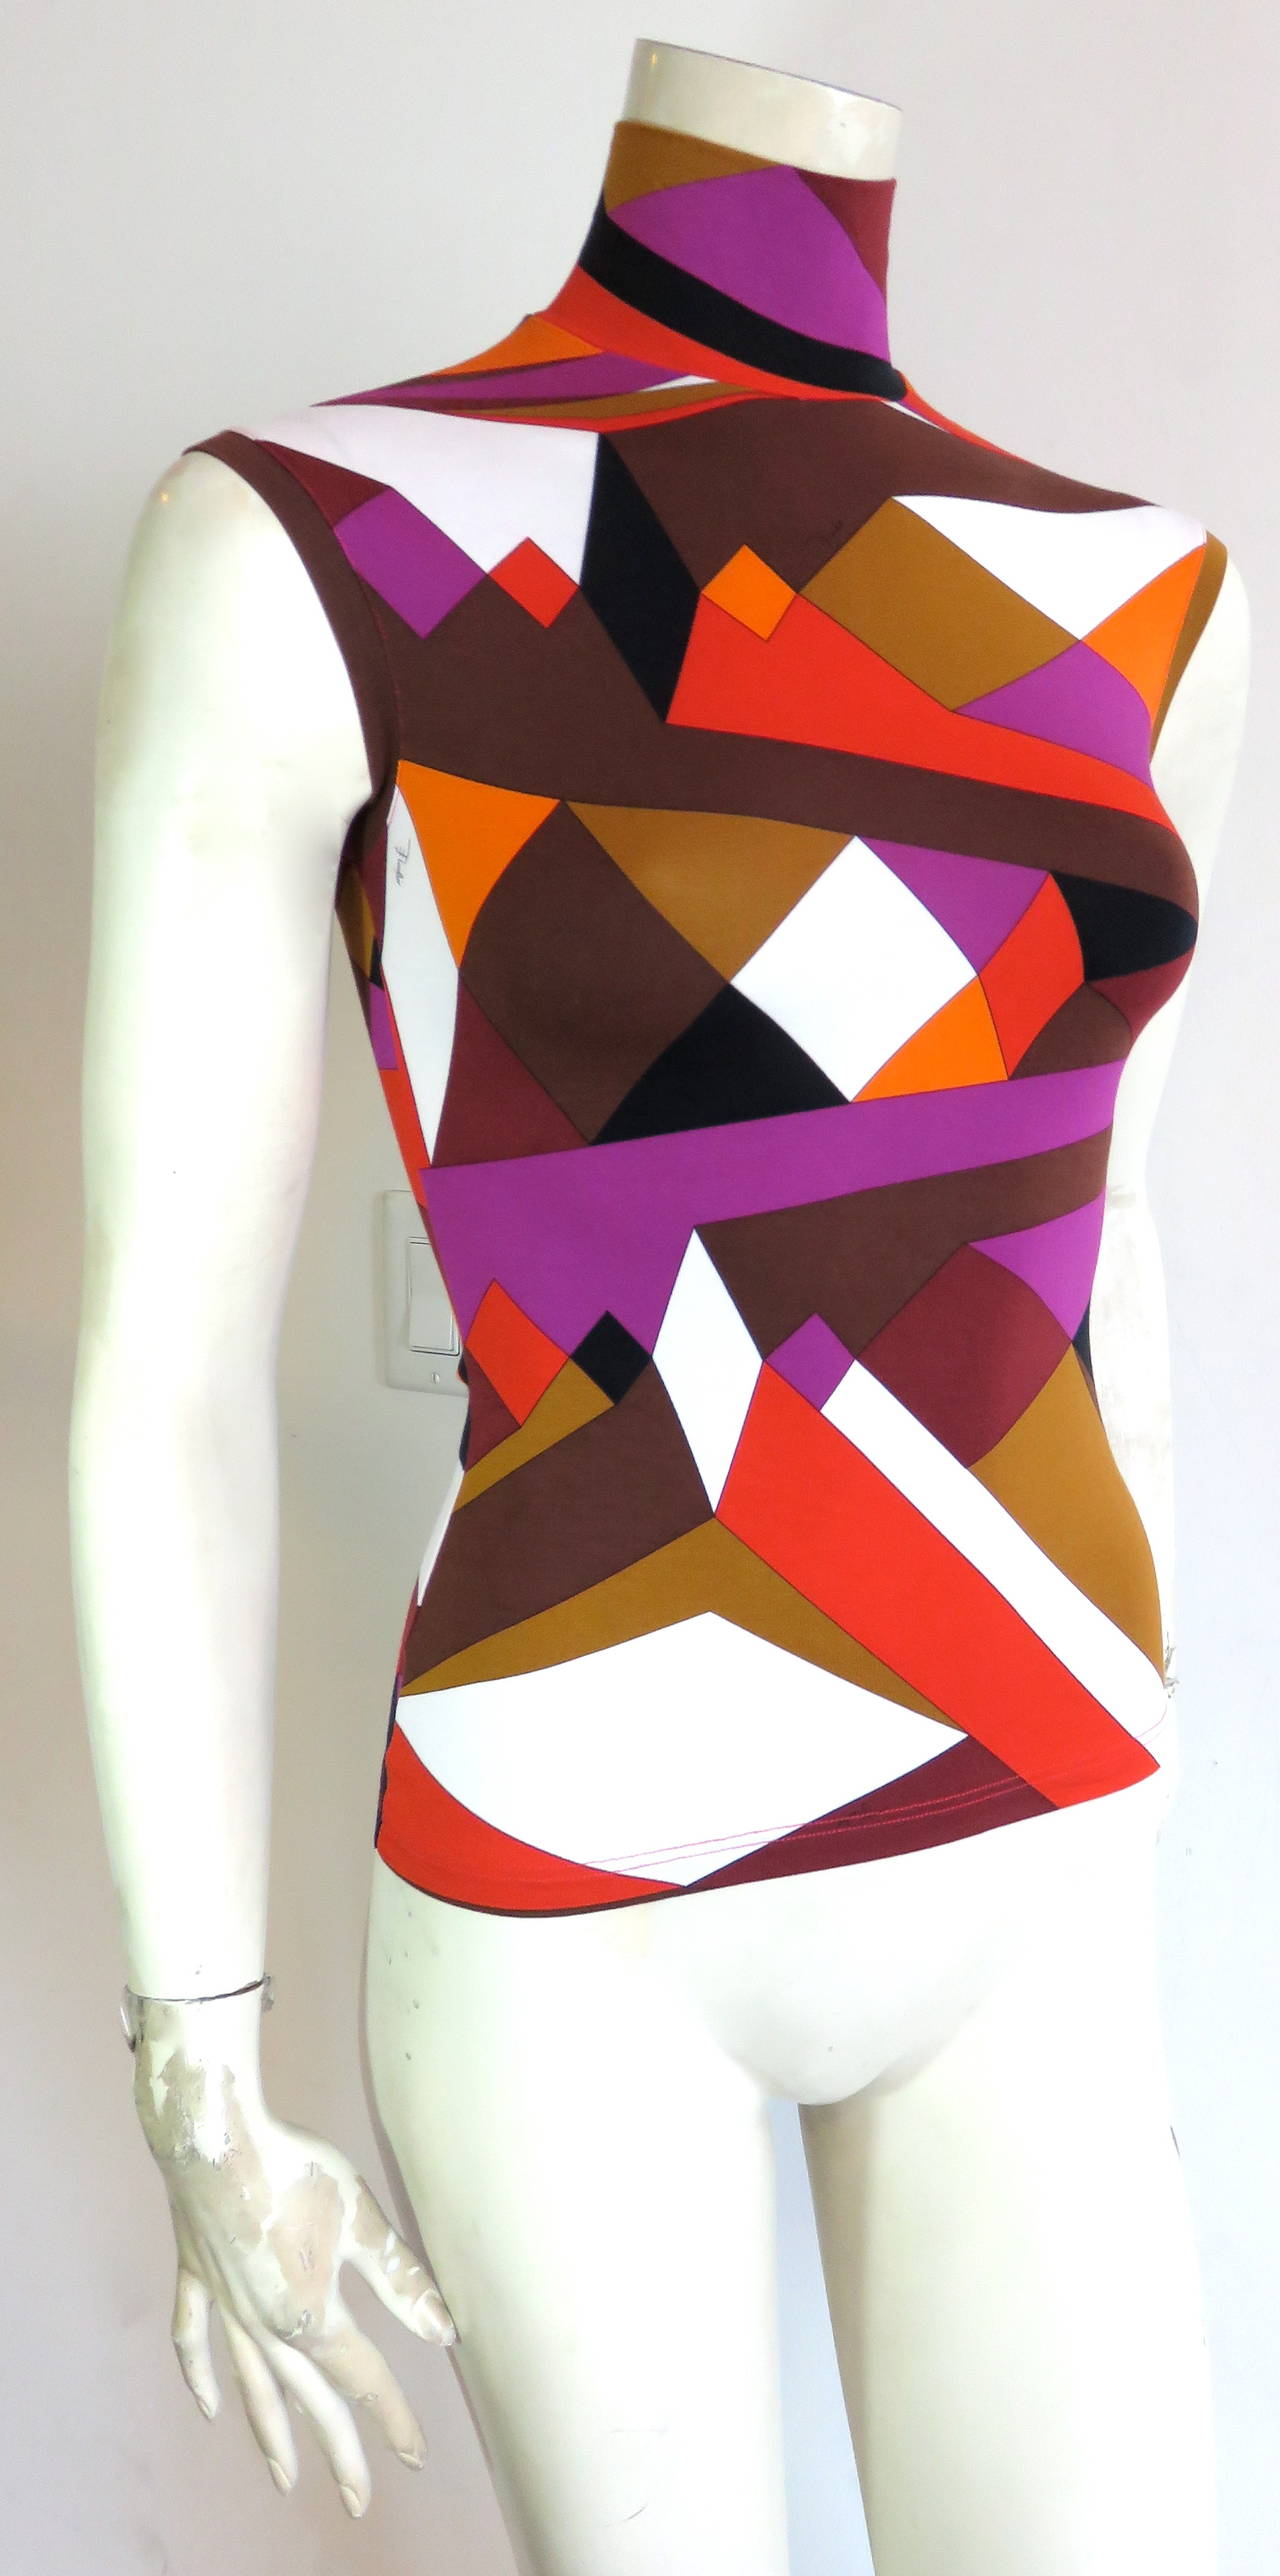 EMILIO PUCCI Geometric knit top.

Signed artwork atop stretchy knit fabric.

Sleeve-less, mock-turtle neckline

Made in Italy, as labeled.

*MEASUREMENTS*

There is no size label attached.  We estimate the top to be a US size 6, and is